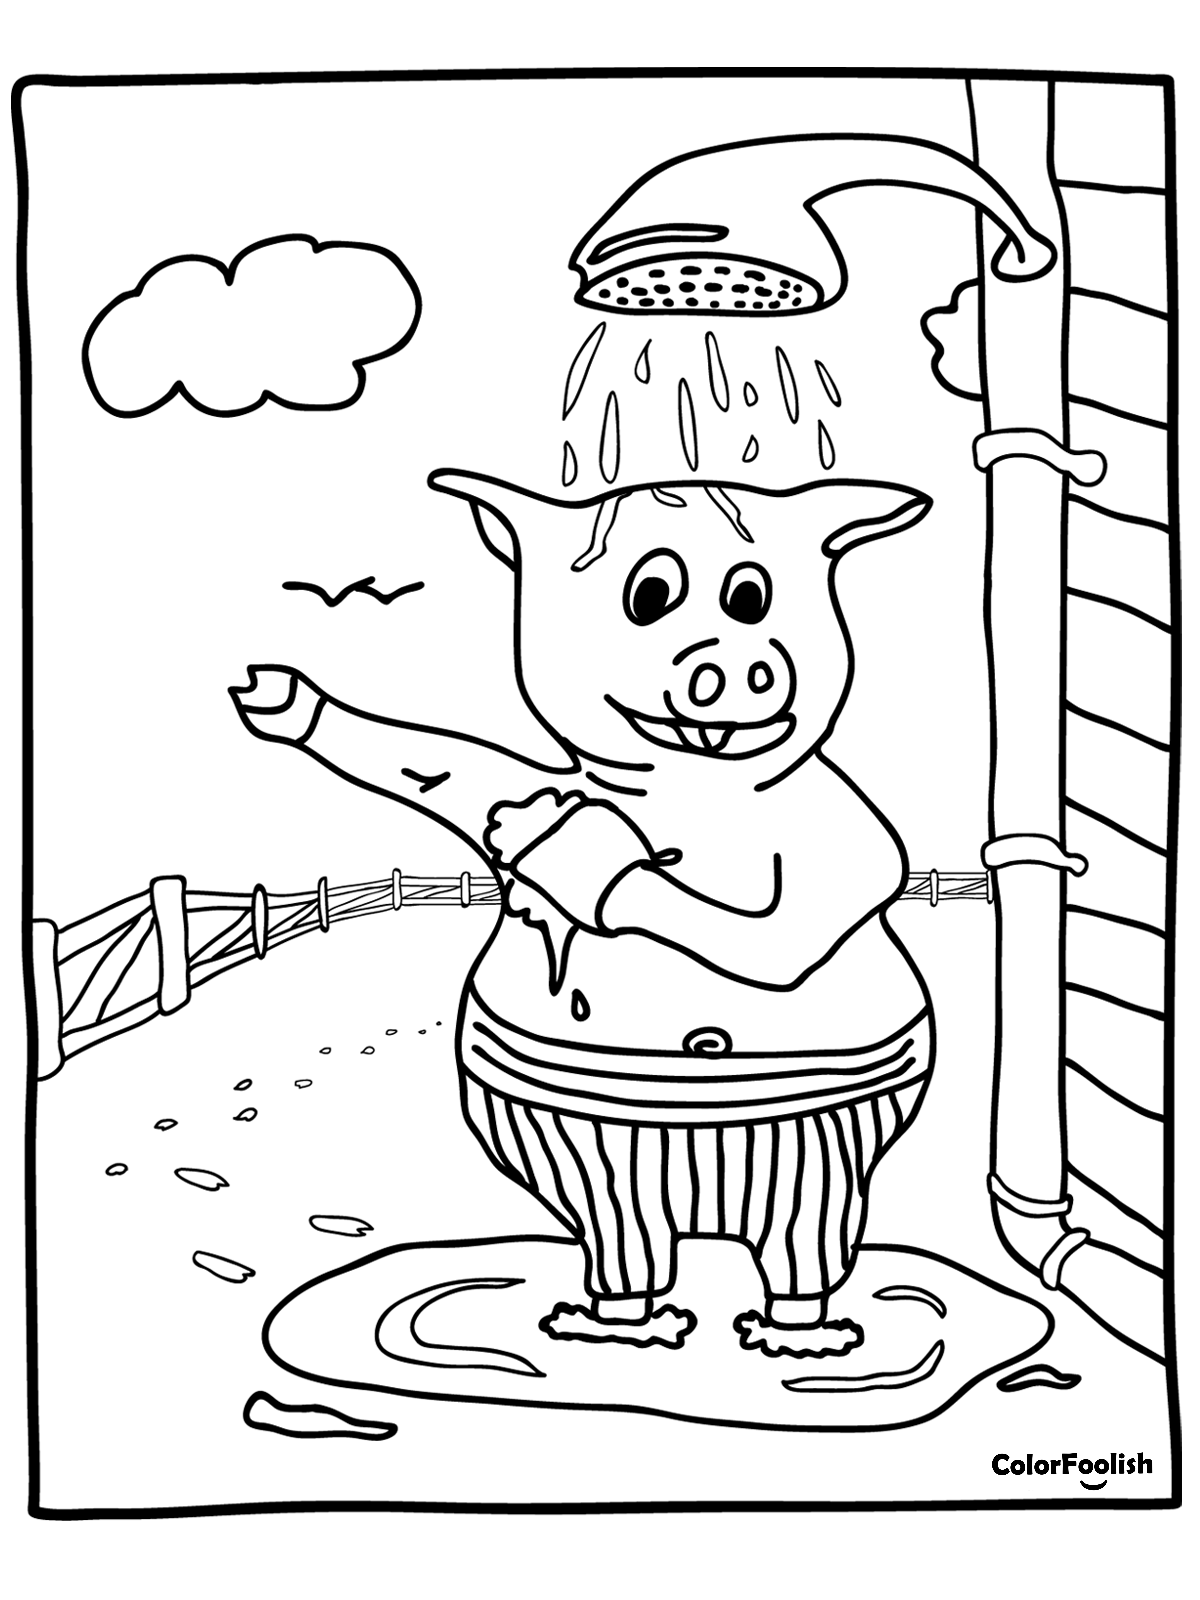 Coloring page of pig washing himself